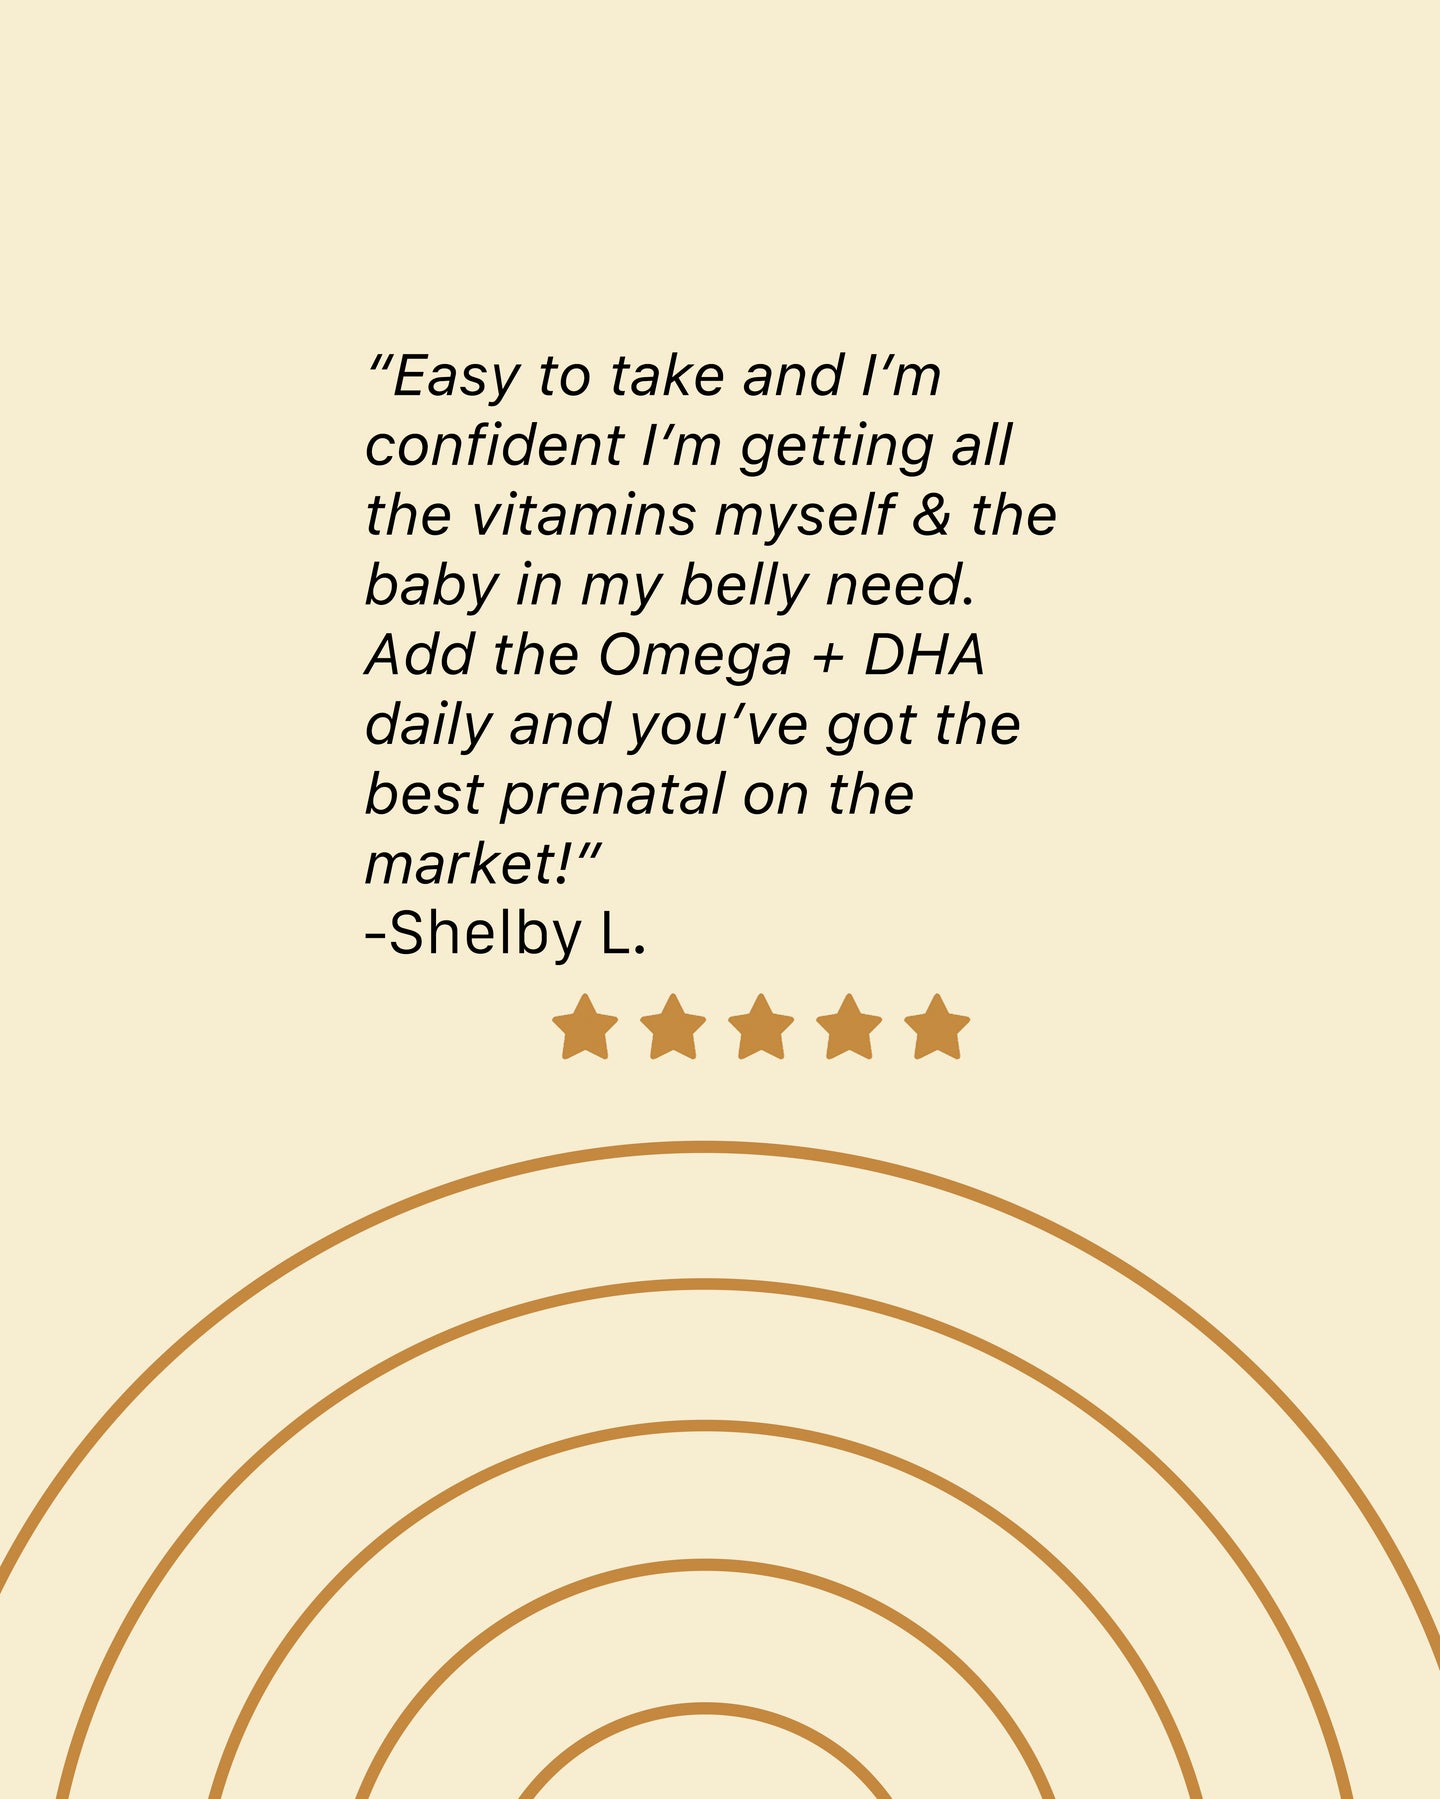 A review left by Shelby L Easy to take and I'm confident I'm getting all the vitamins myself and the baby  in my belly need add the Omega plus DHA daily and you've got the best prenatal on the market